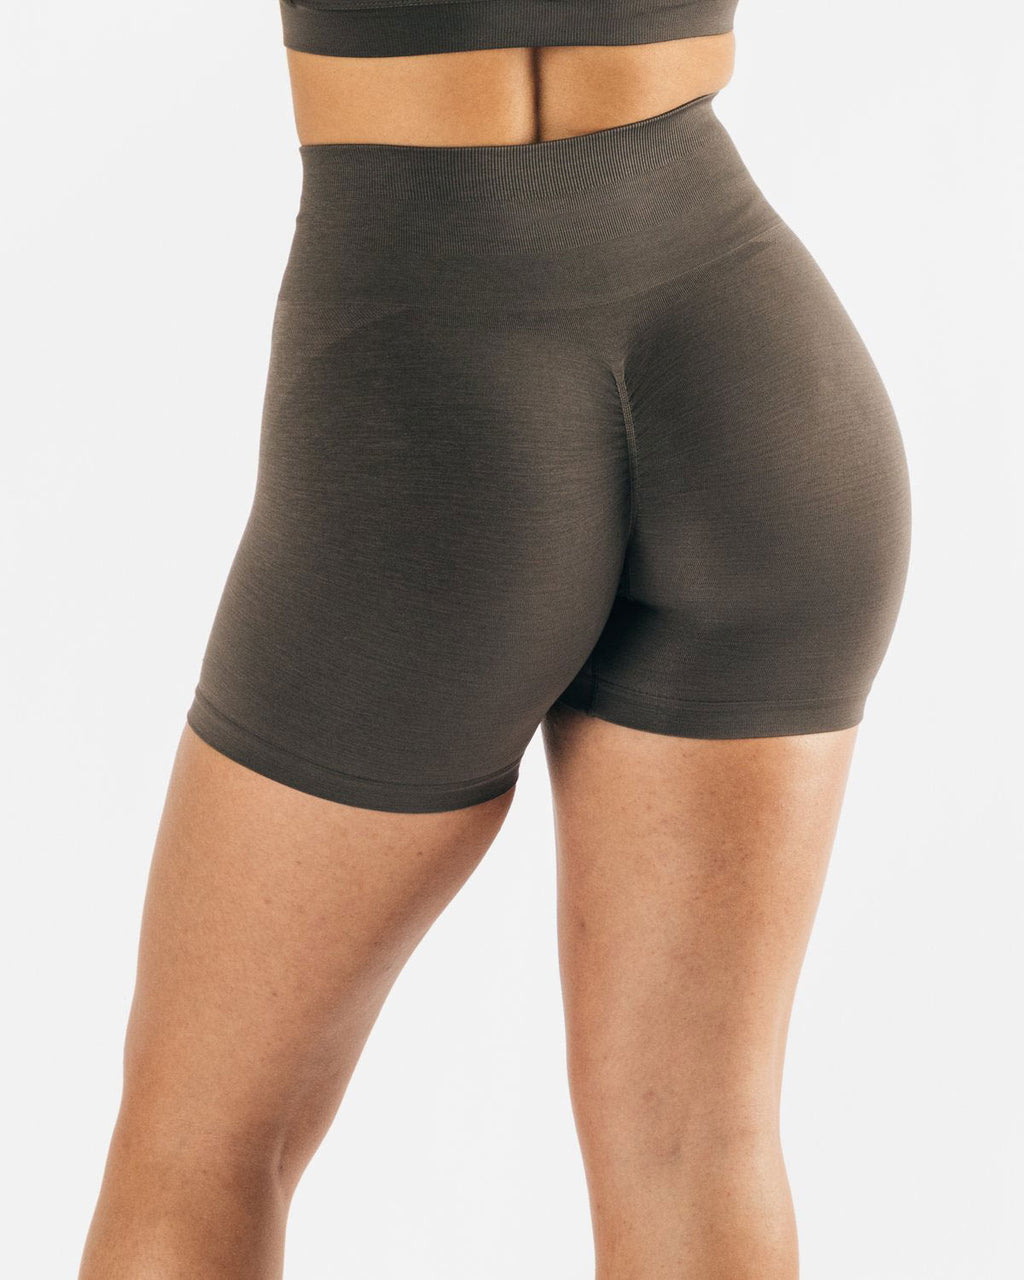 Magnitude Seamless Shorts - Coffee - | LIMITLESS FIT WEAR